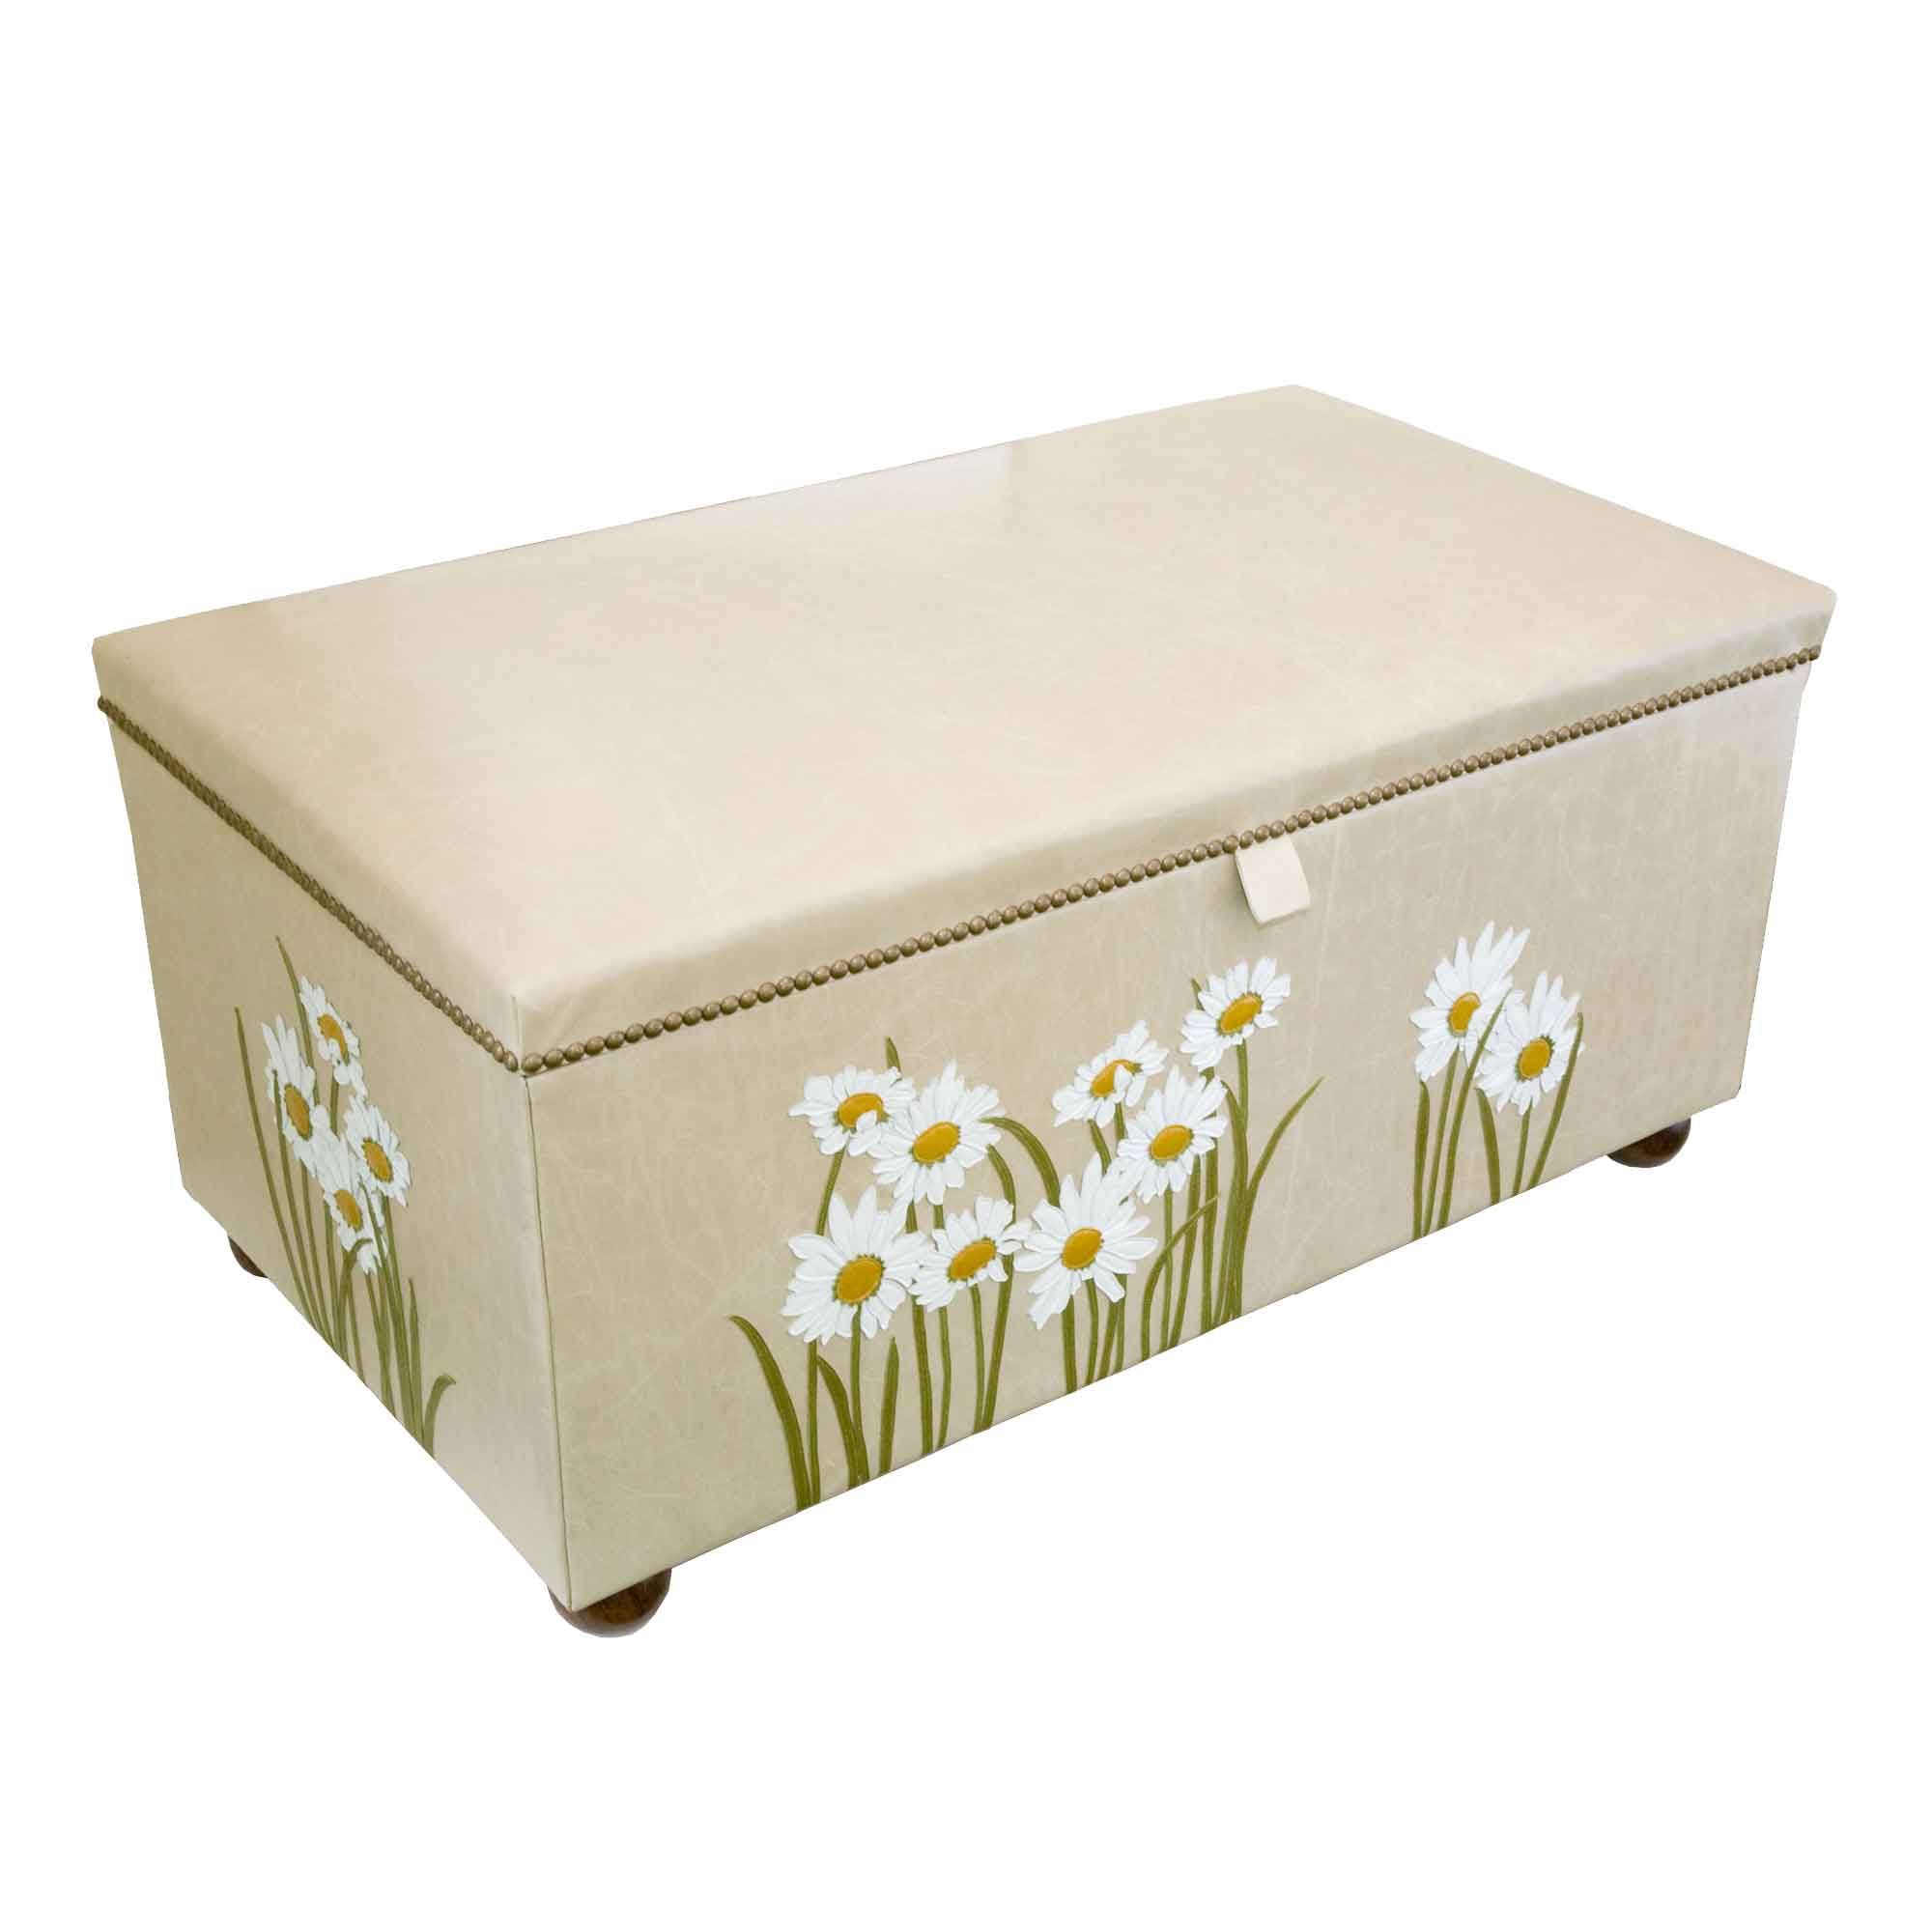 Cream Ottoman With Daisy – Susannah Hunter Pertaining To Cream Pouf Ottomans (View 7 of 20)